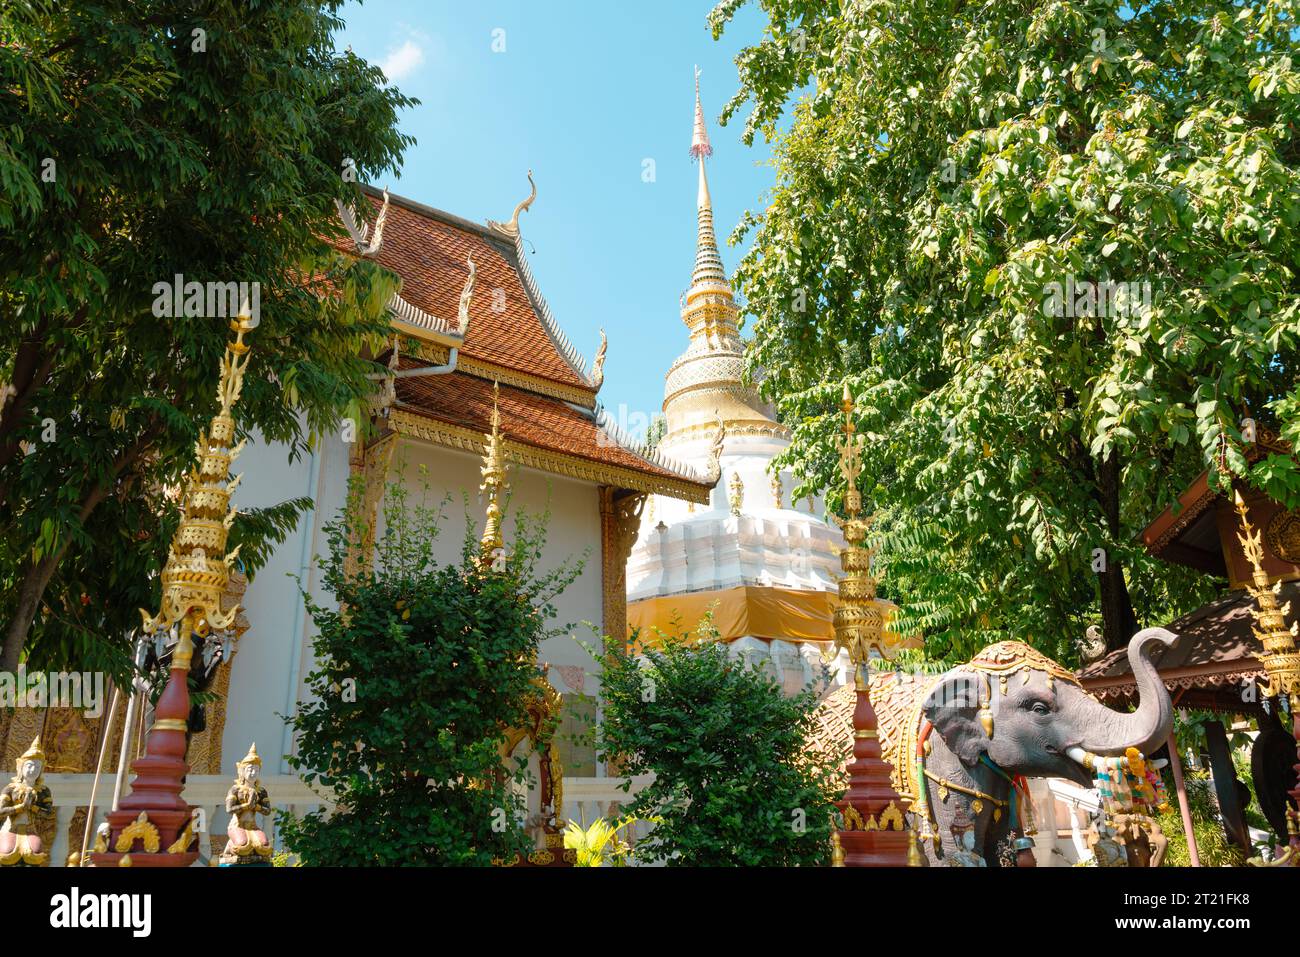 Chiang Mai old city temple in Thailand Stock Photo